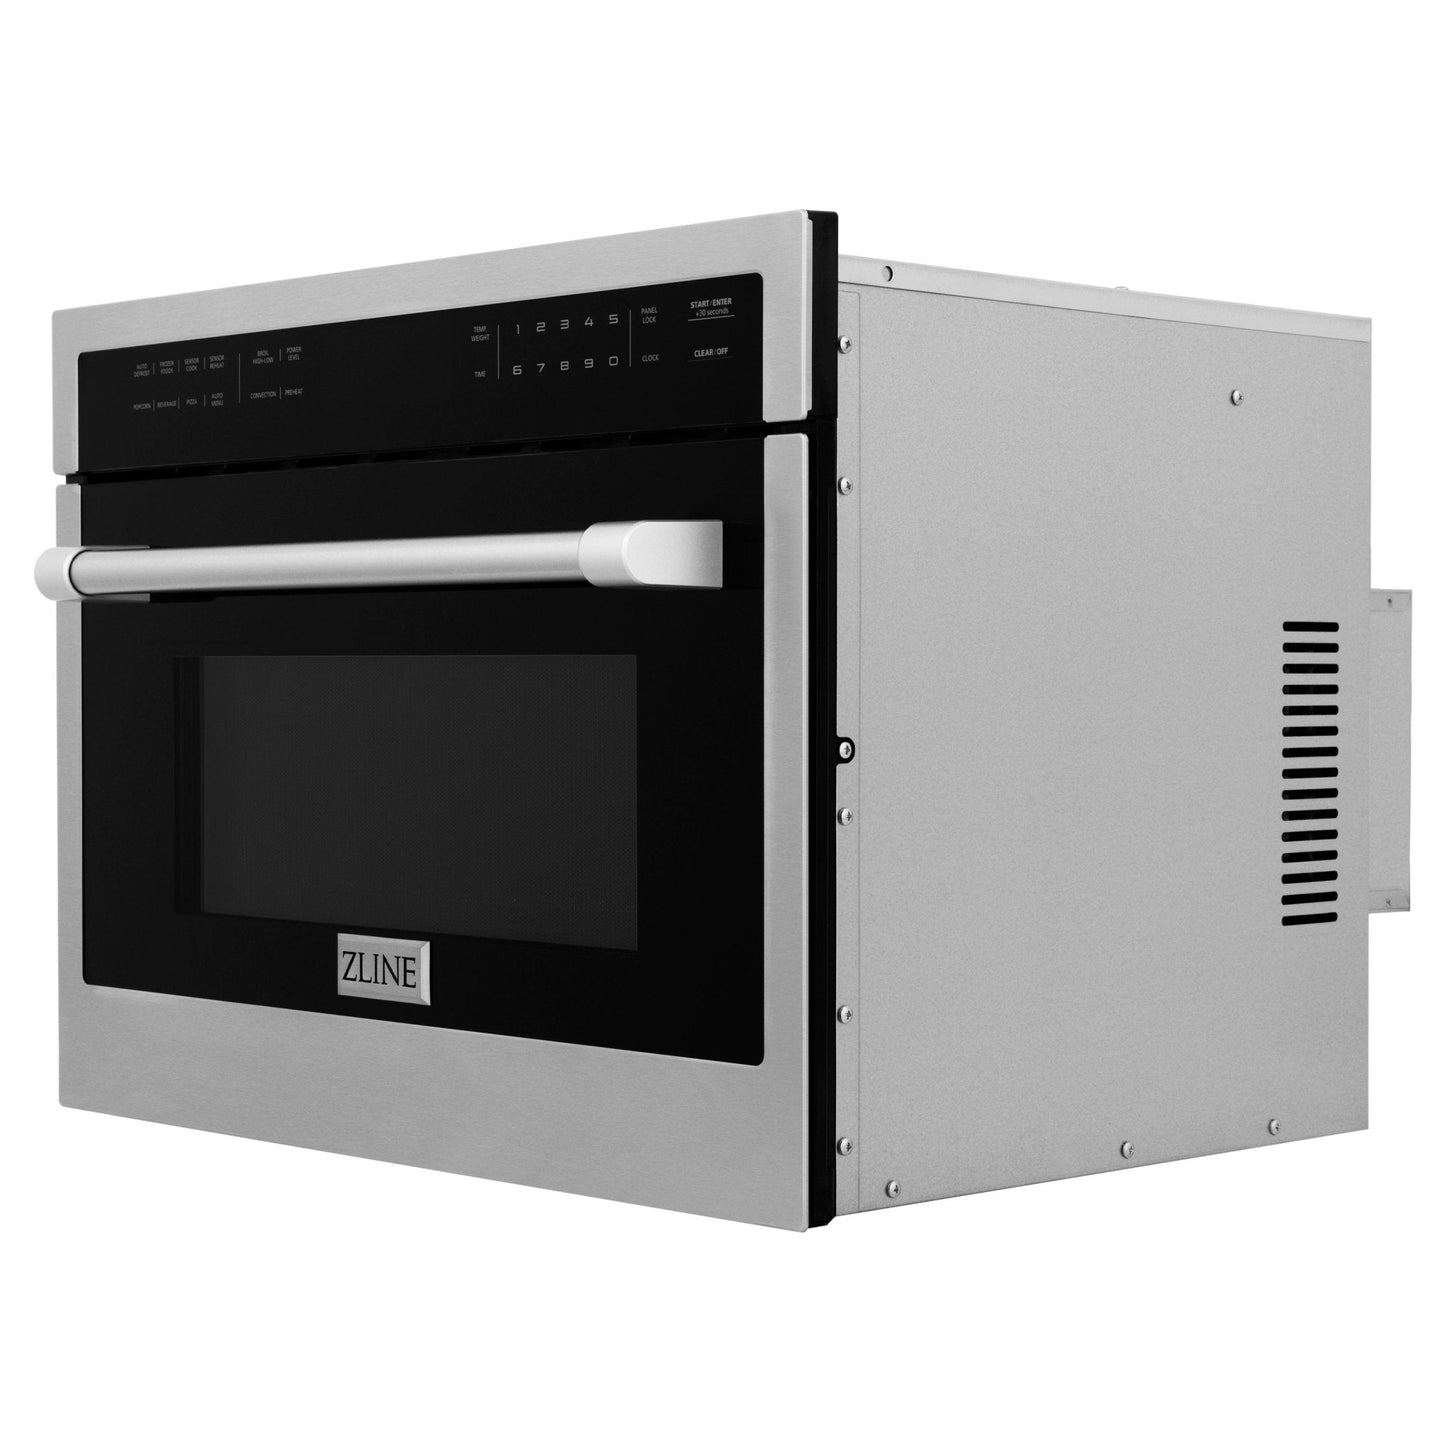 ZLINE 24" Built-in Convection Microwave Oven with Speed and Sensor Cooking (MWO-24)